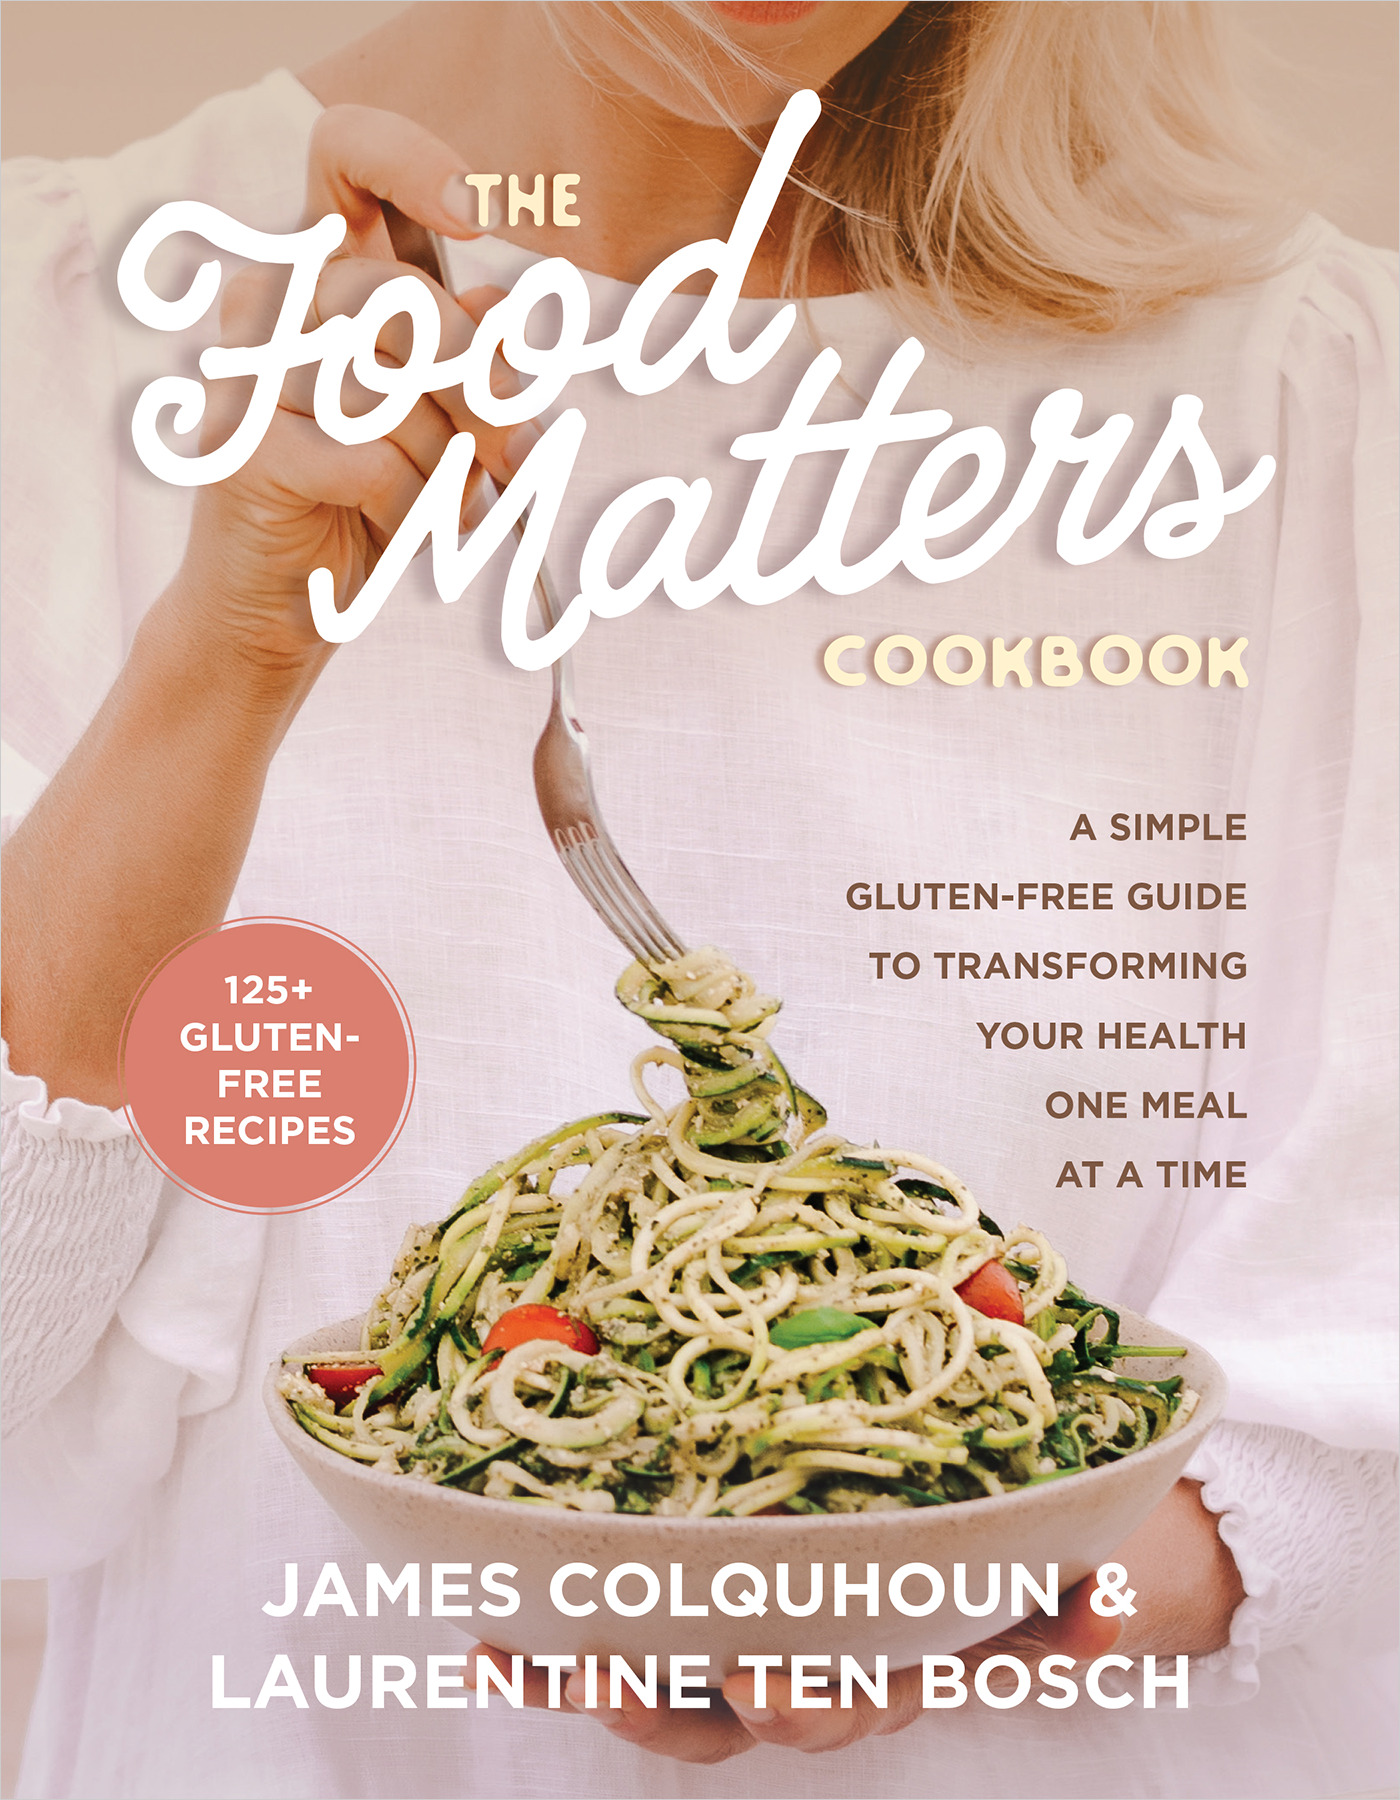 The Food Matters Cookbook : A Simple Gluten-Free Guide to Transforming Your Health One Meal at a Time | Cookbook